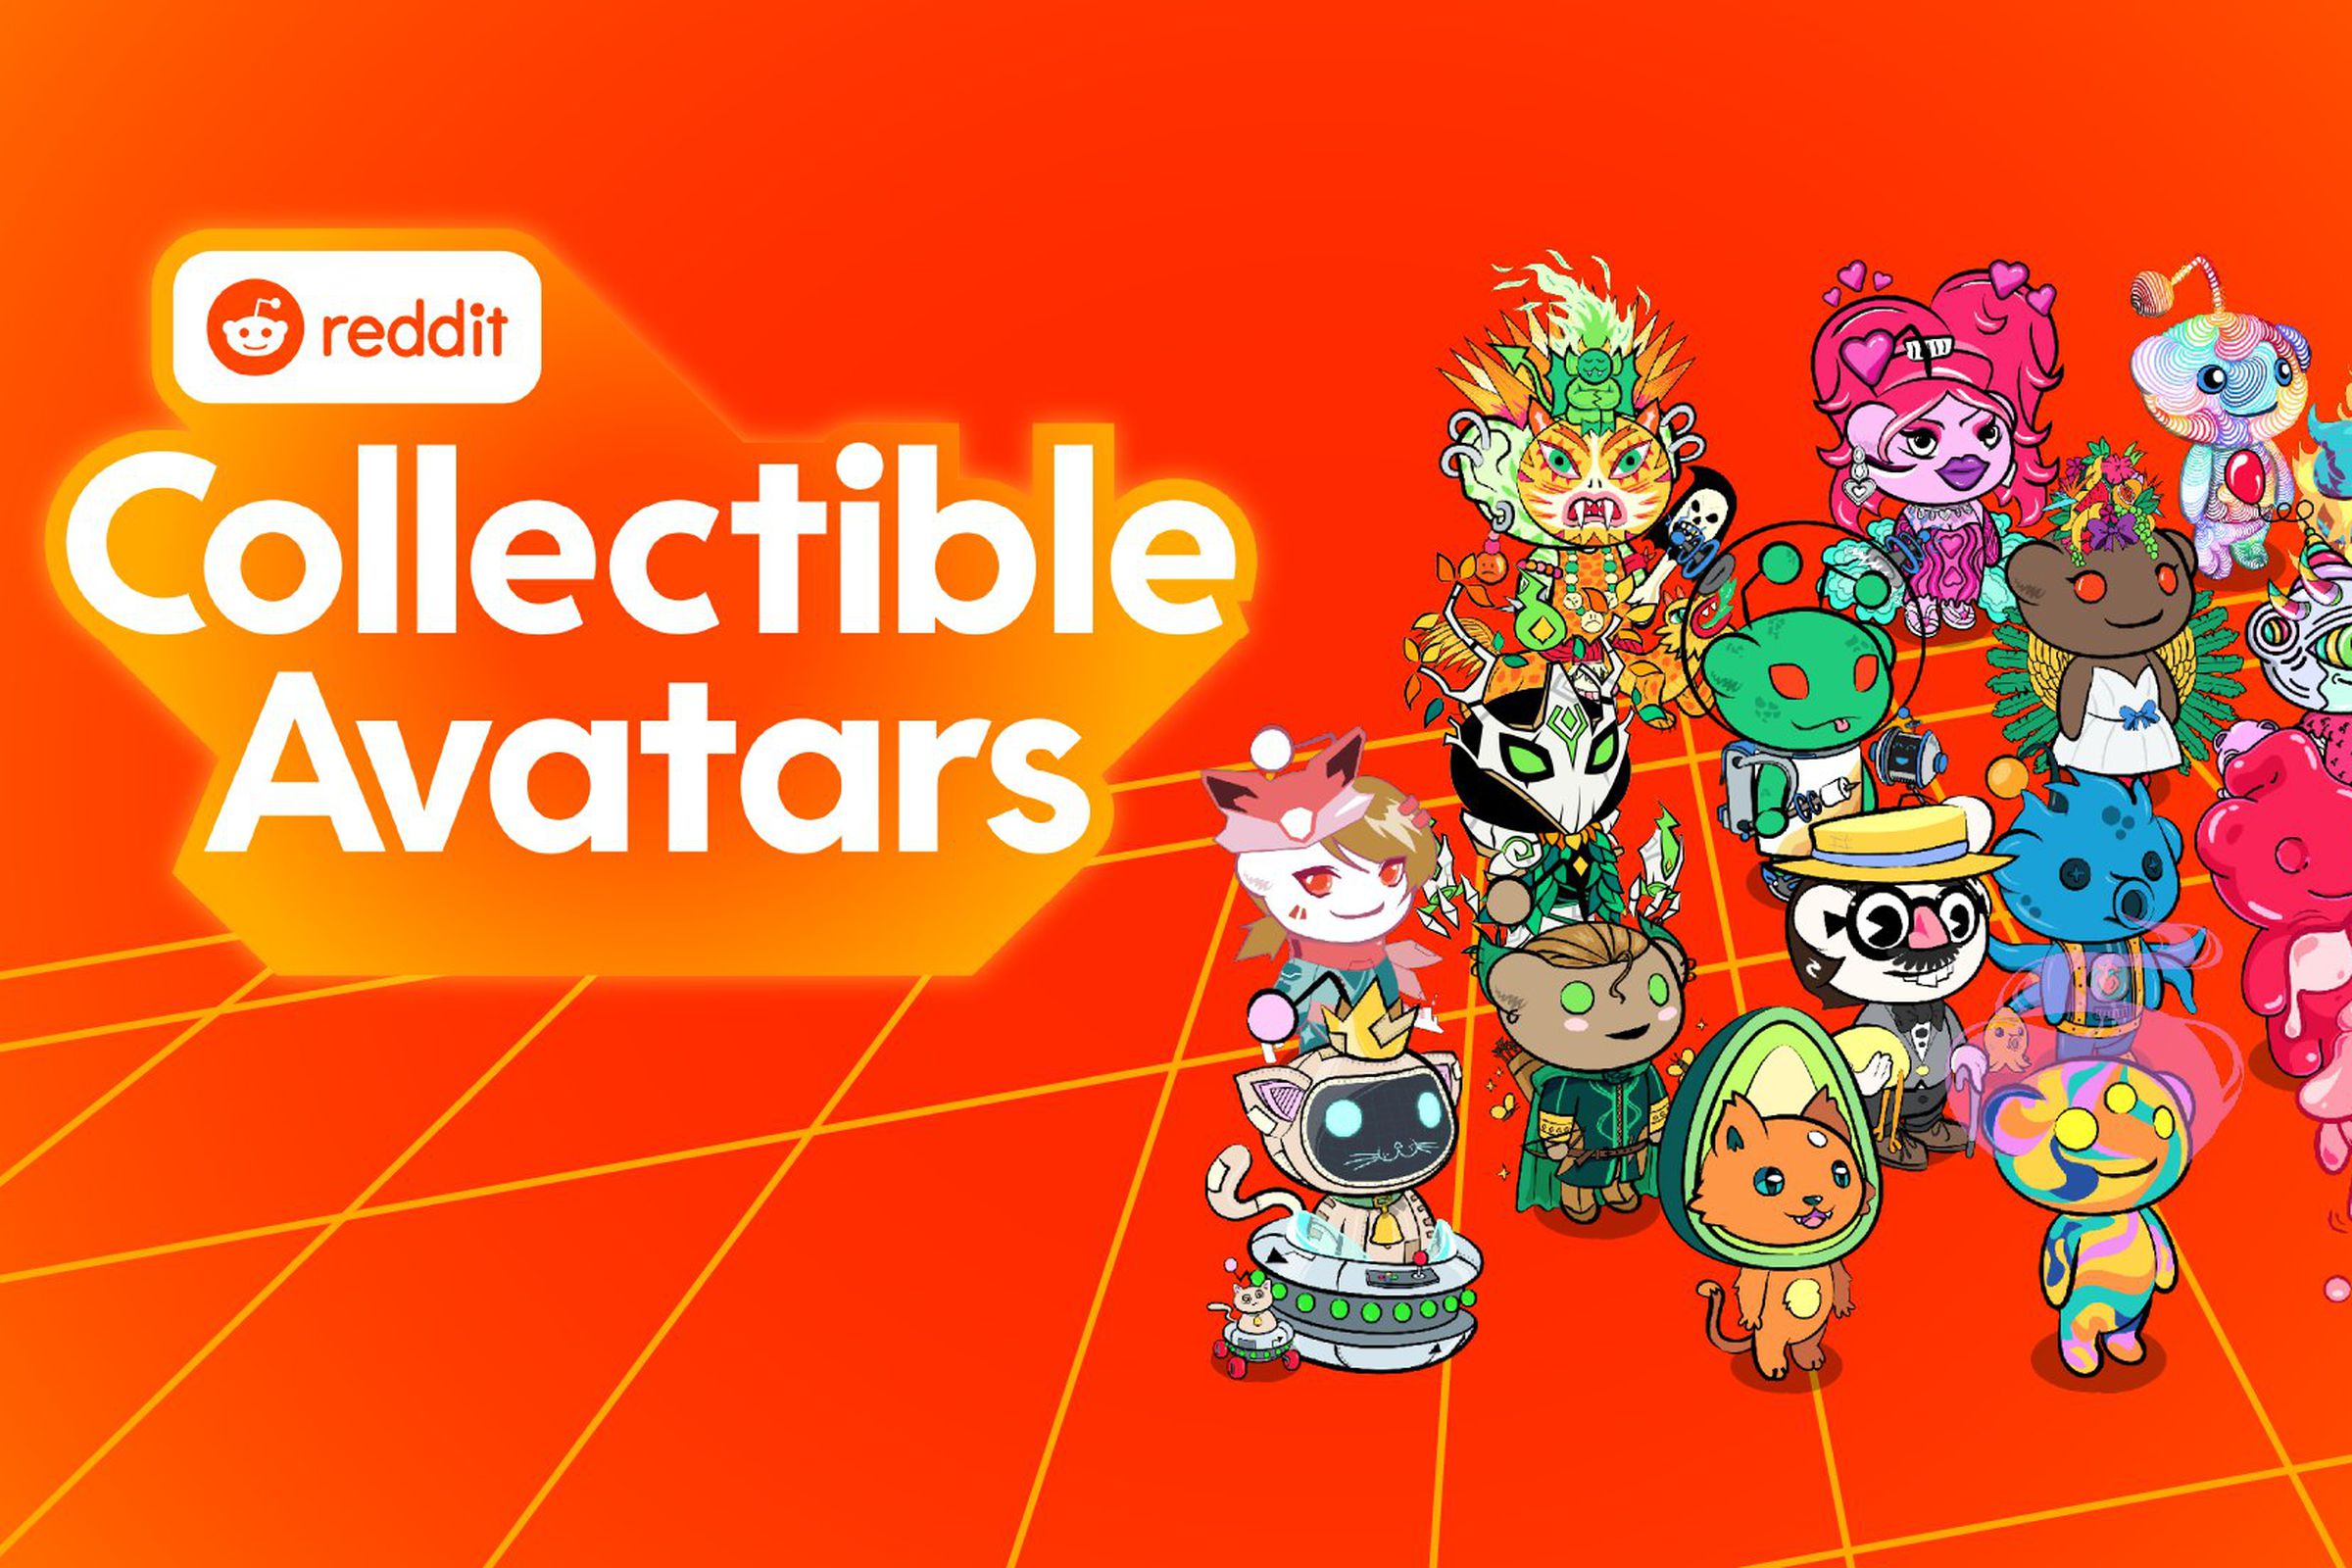 Multiple variations of Snoo the Reddit mascot in different themes and outfits.